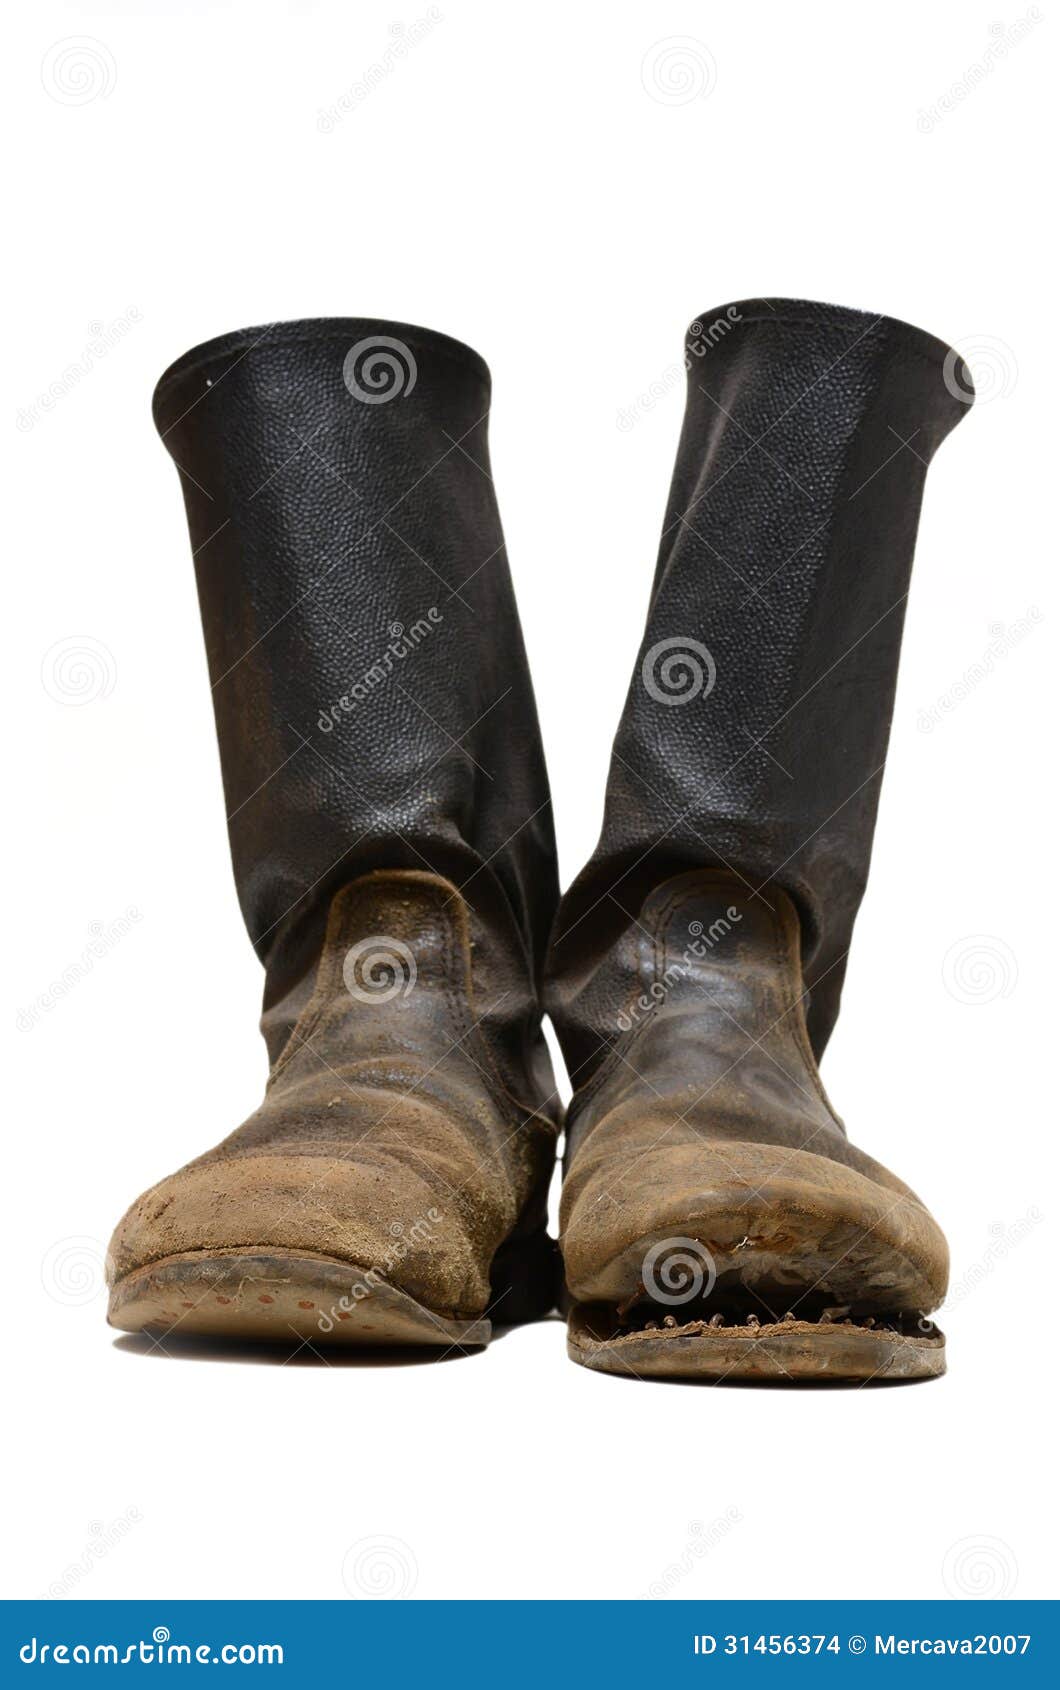 The Old Soldiers Boots. Stock Images - Image: 31456374